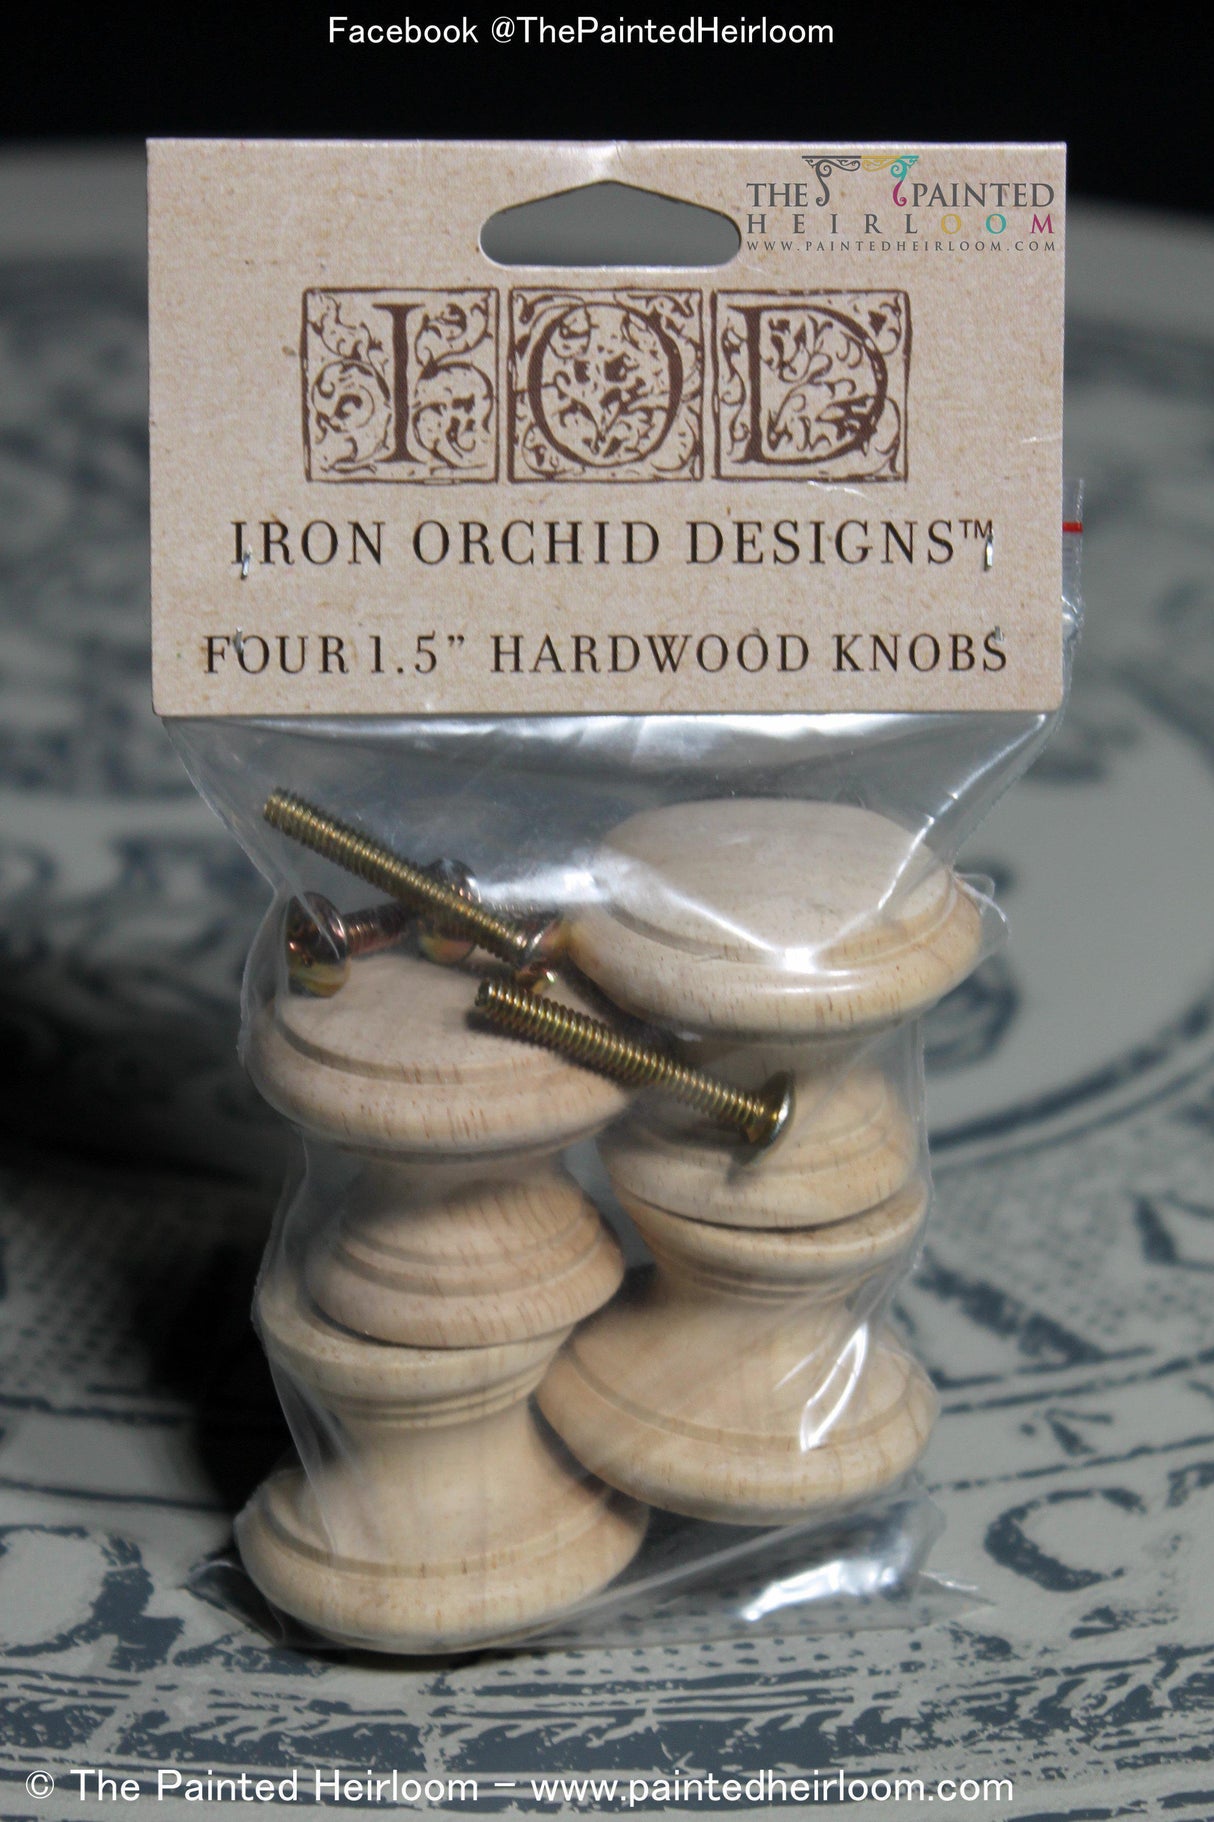 IOD Hardwood Knobs by Iron Orchid Designs @ Painted Heirloom